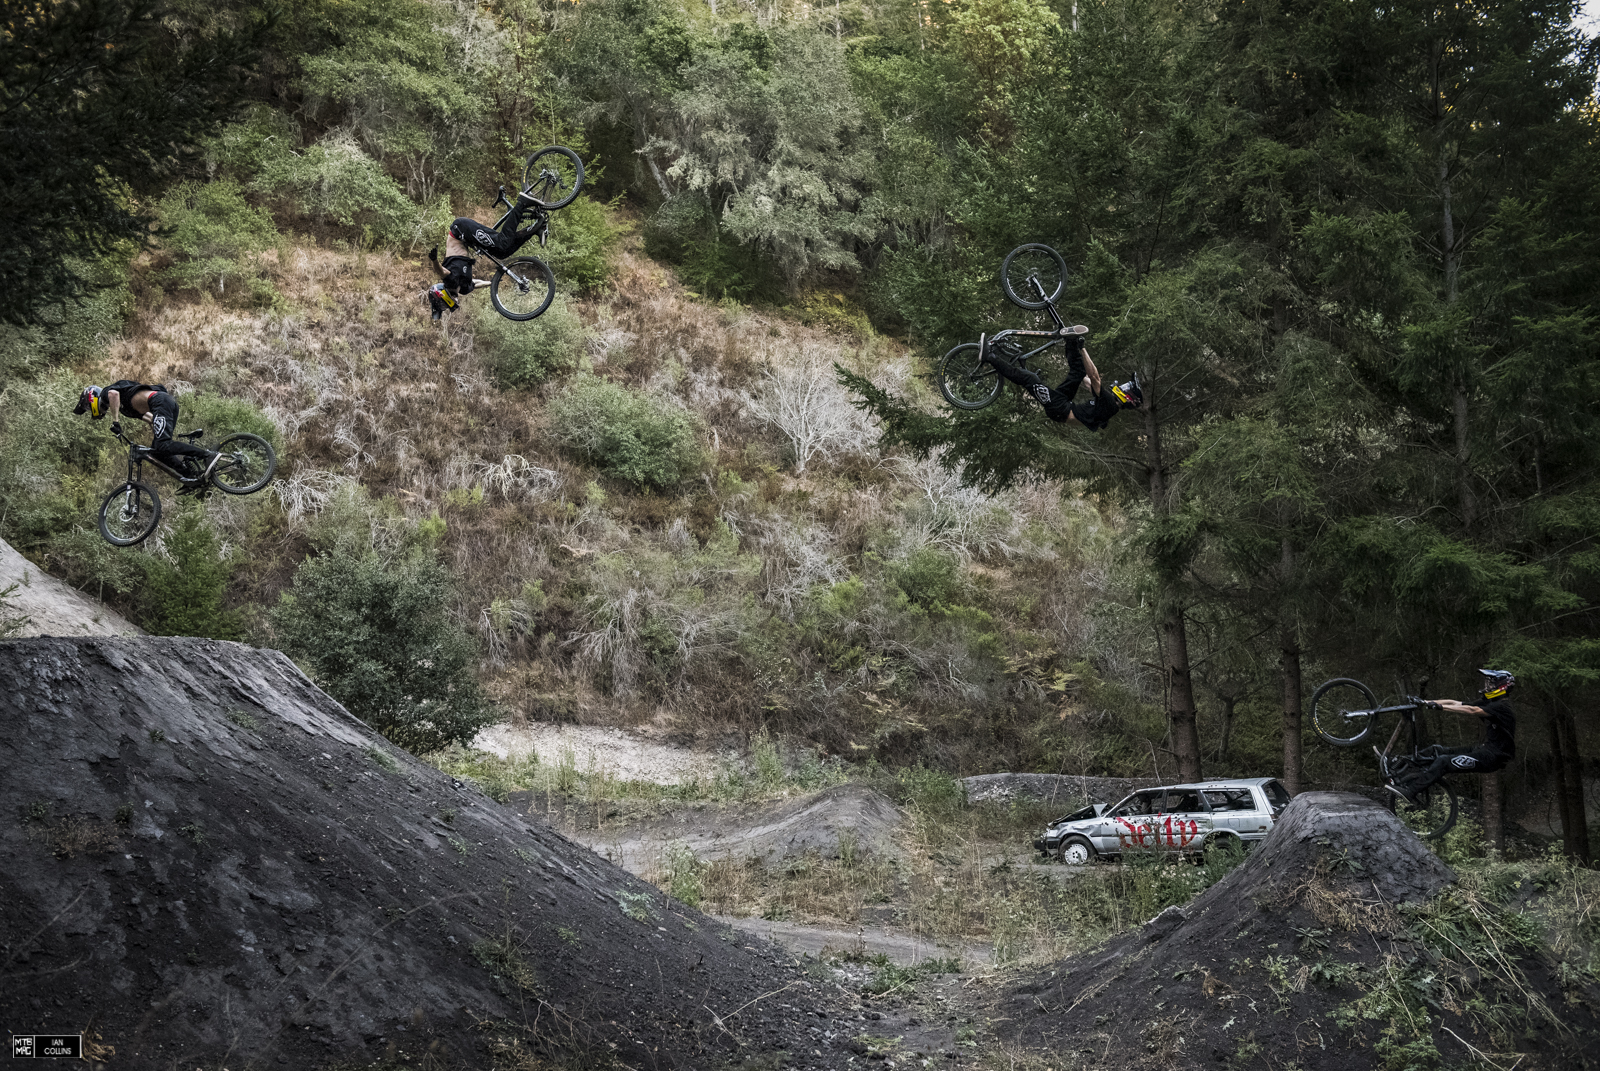 Brandon pushing the envelope with the most ridiculous combo on a DH bike. Flip Can to tuck.